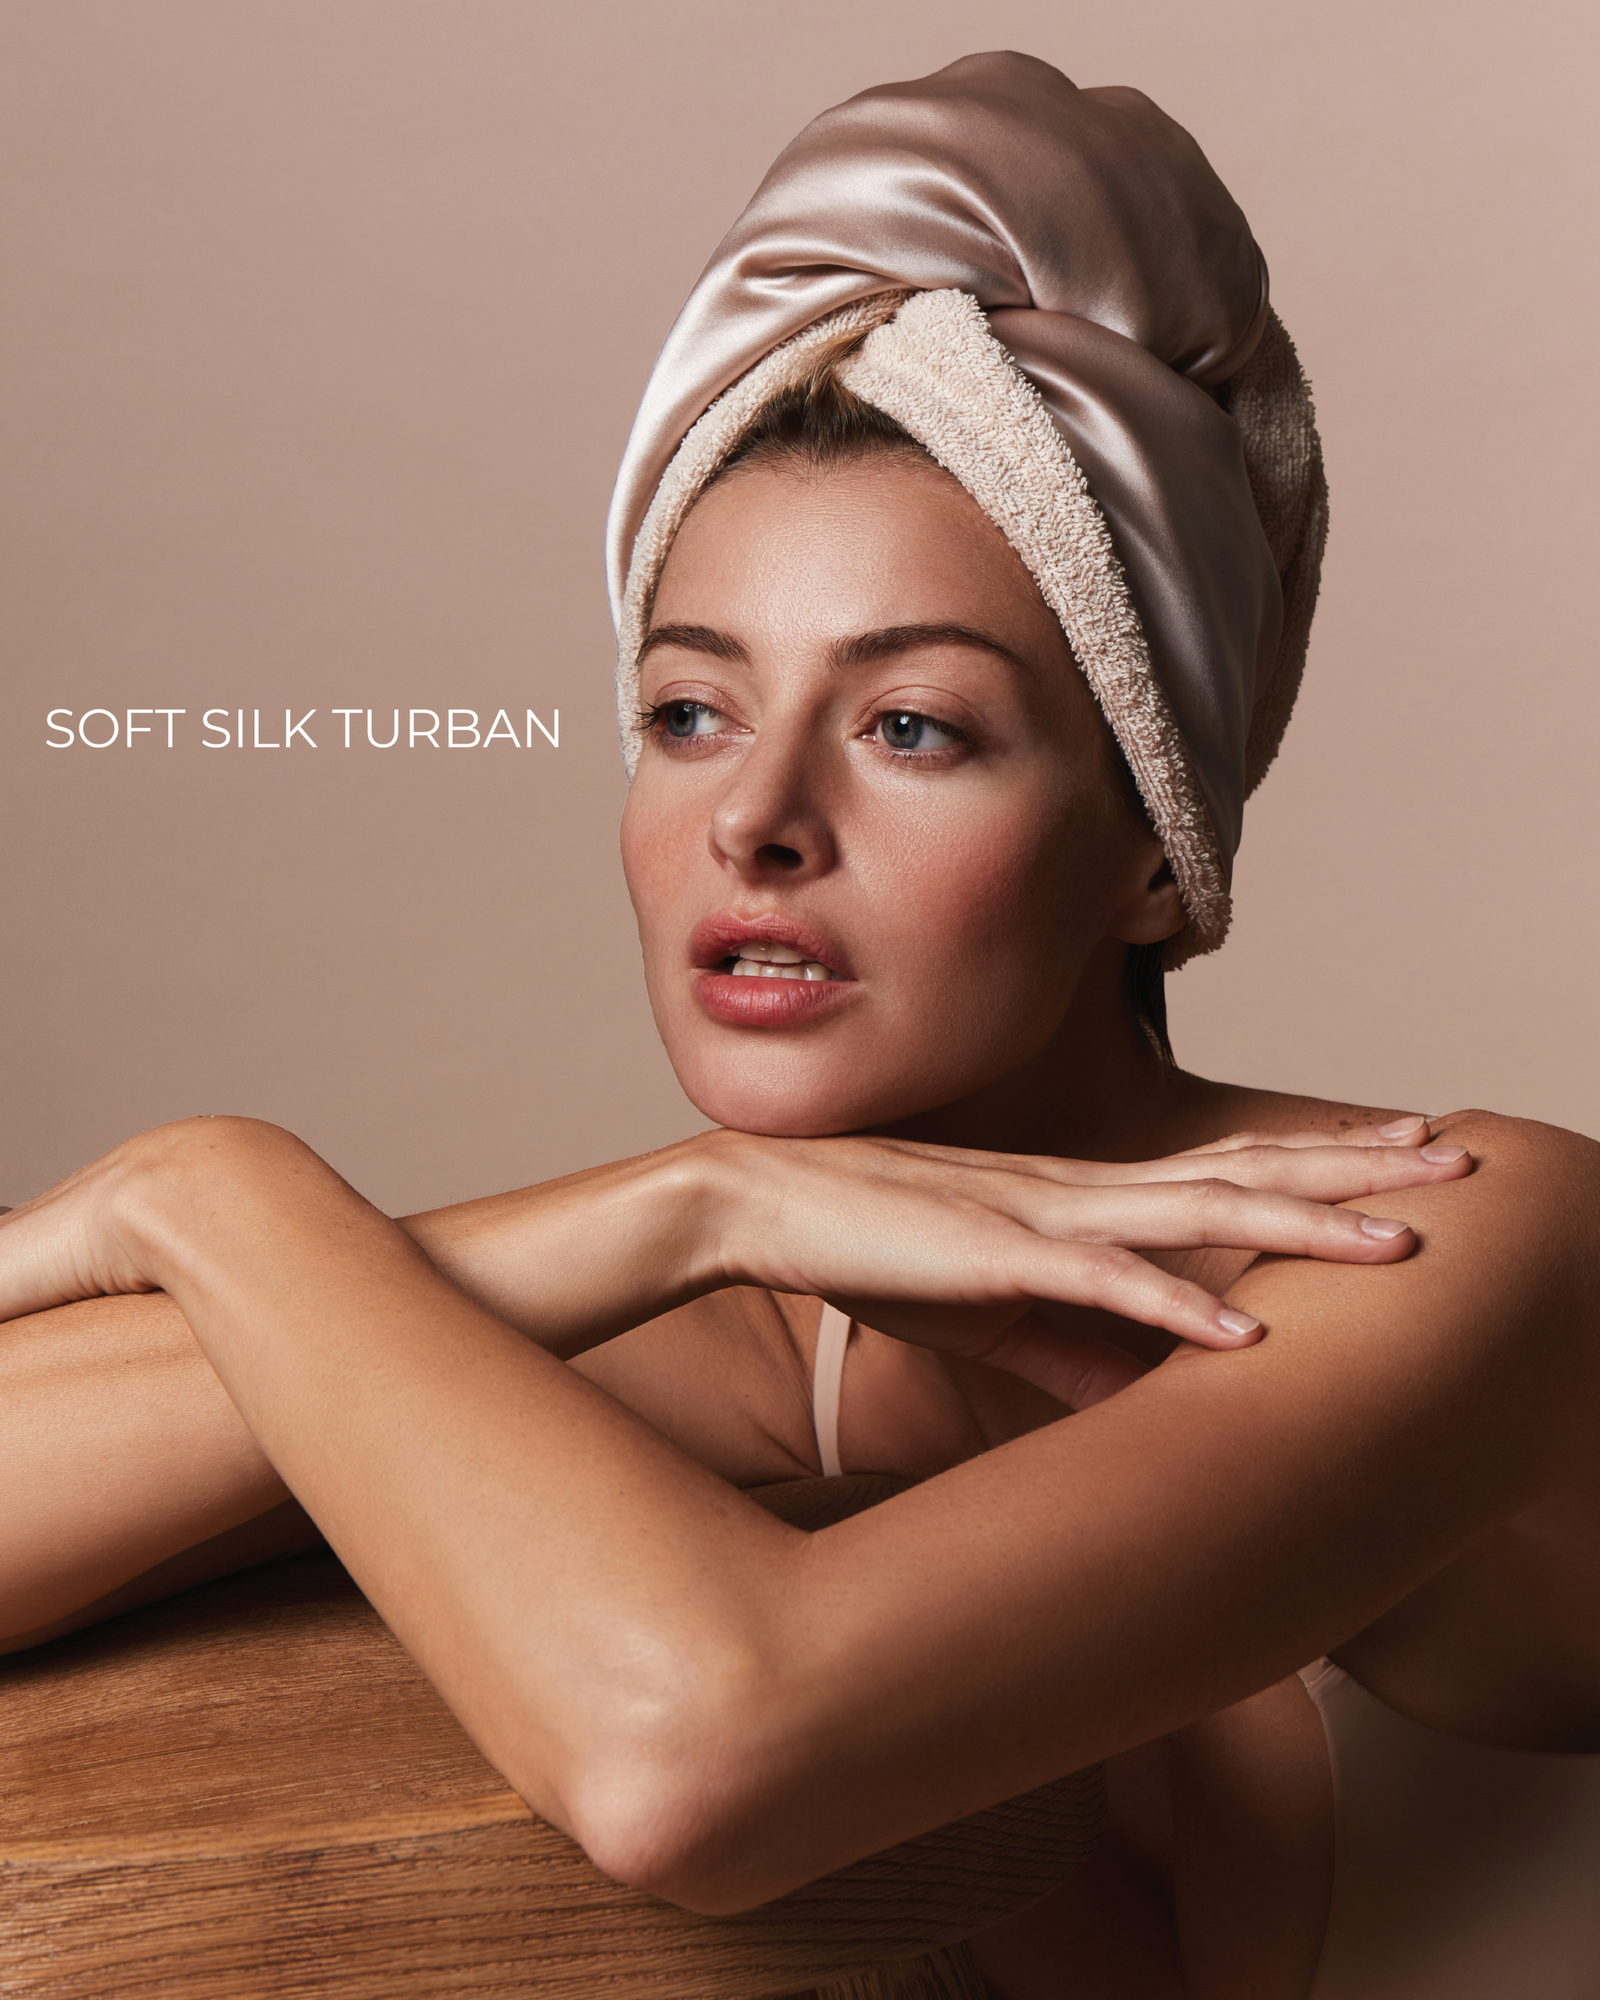 Soft silk turban mon mou for delicate hair drying